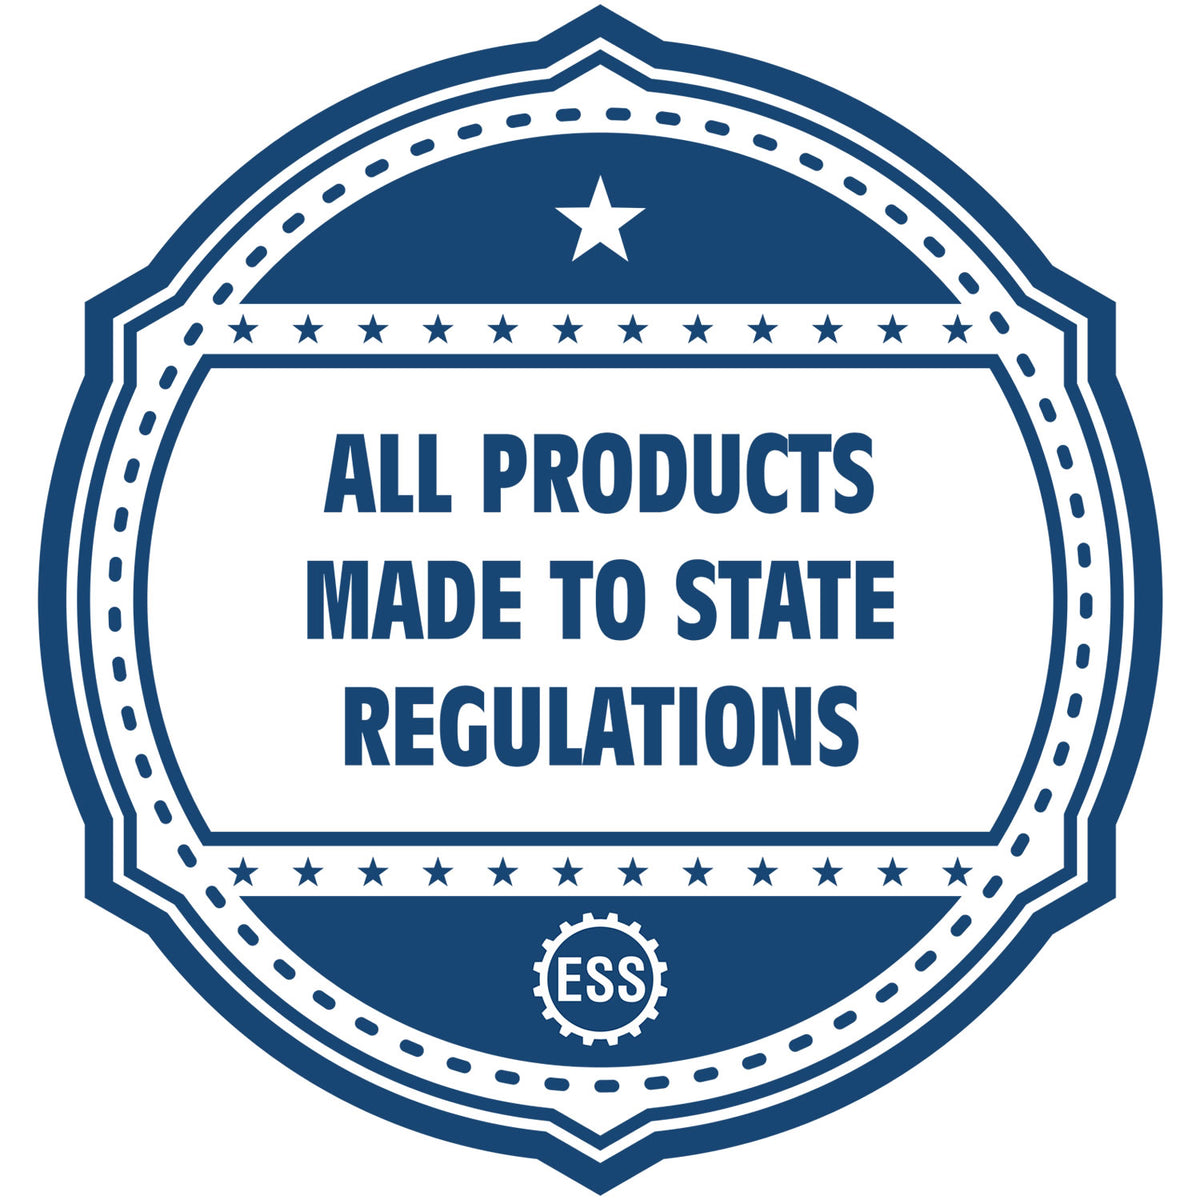 A blue icon or badge for the Hybrid Florida Landscape Architect Seal showing that this product is made in compliance with state regulations.